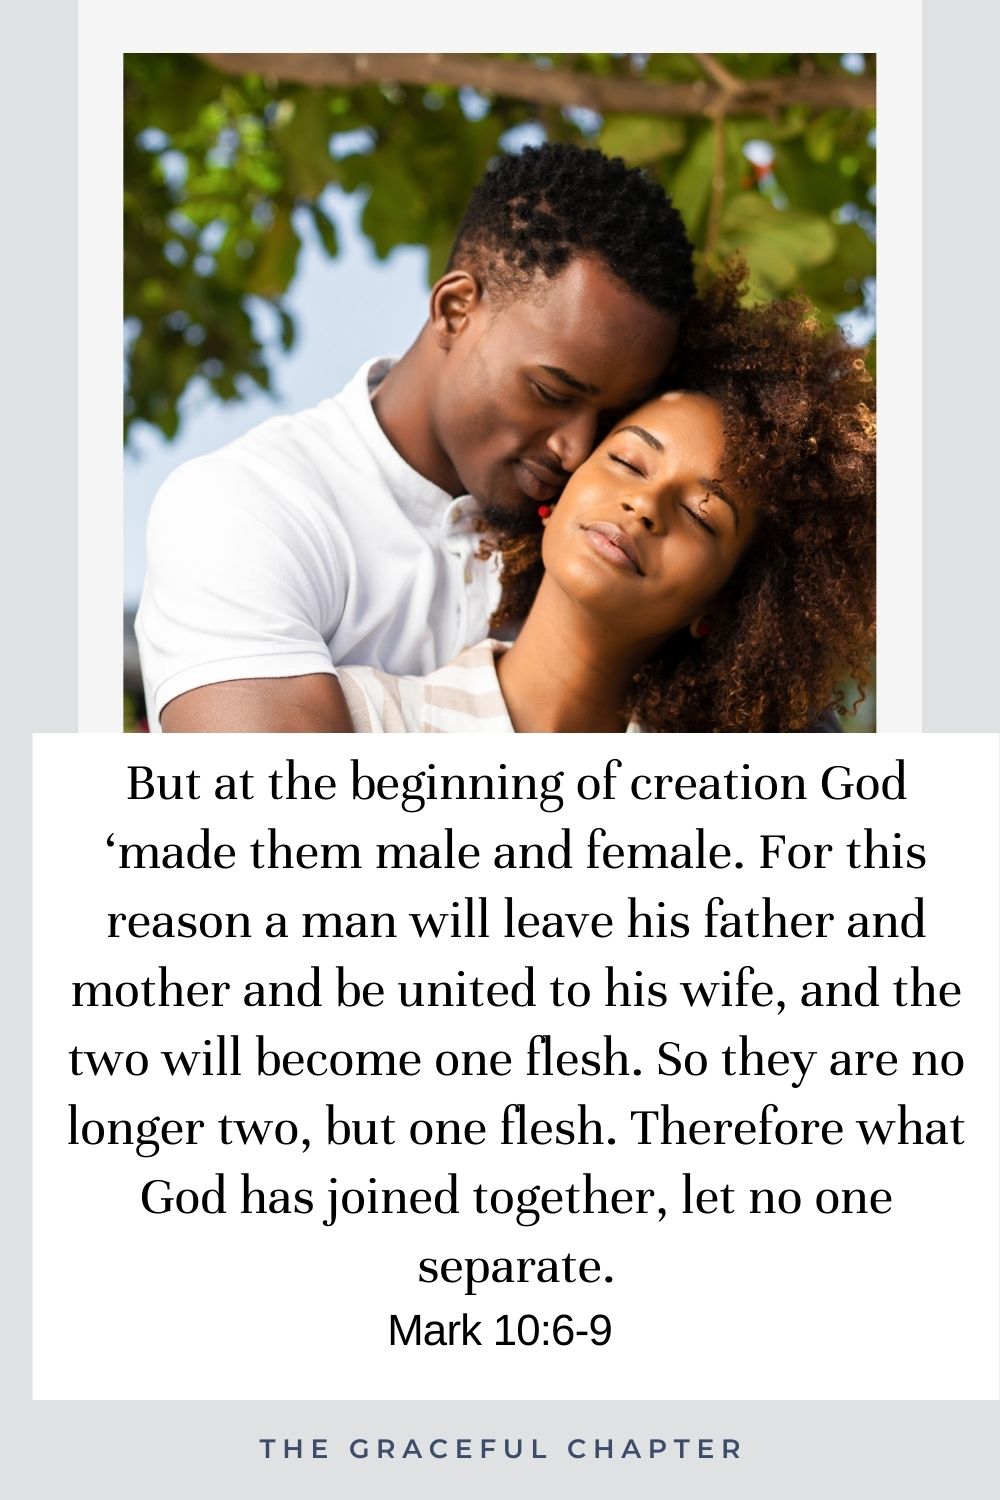 But at the beginning of creation God ‘made them male and female. For this reason a man will leave his father and mother and be united to his wife, and the two will become one flesh. So they are no longer two, but one flesh. Therefore what God has joined together, let no one separate. Mark 10:6-9